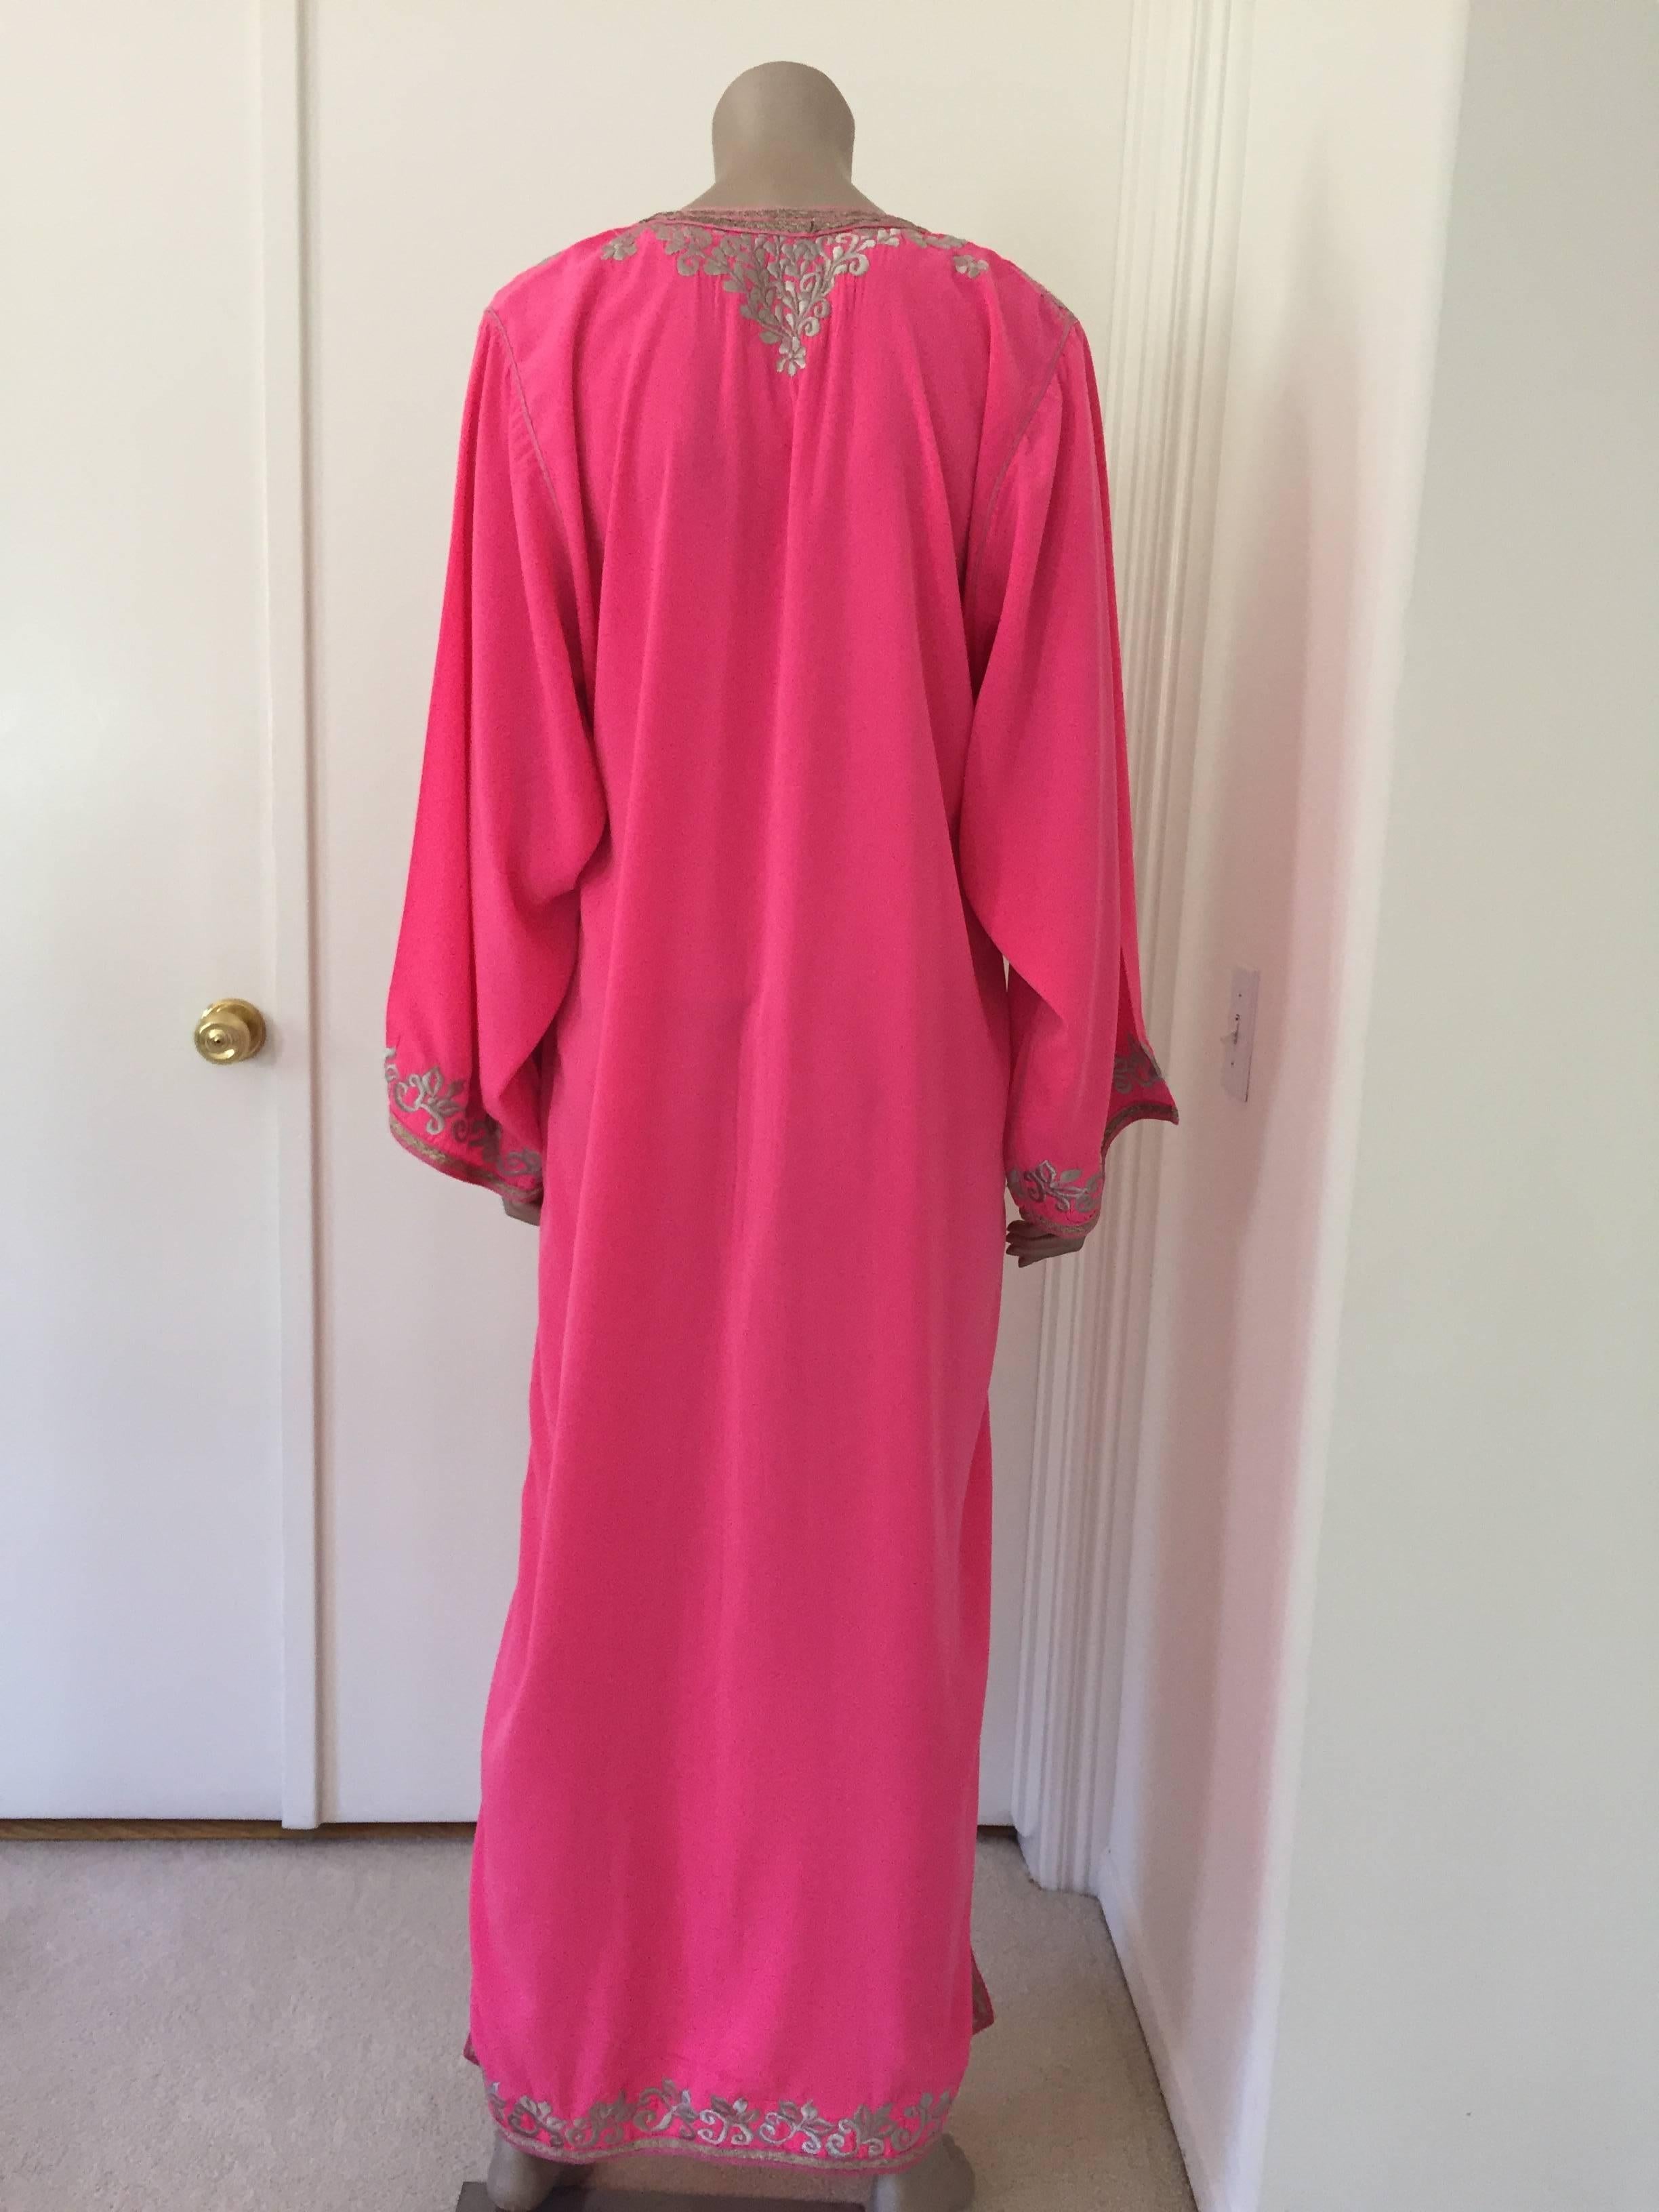 Moroccan Hot Pink Caftan with Silver Embroideries Maxi Dress Kaftan Size L to XL 1